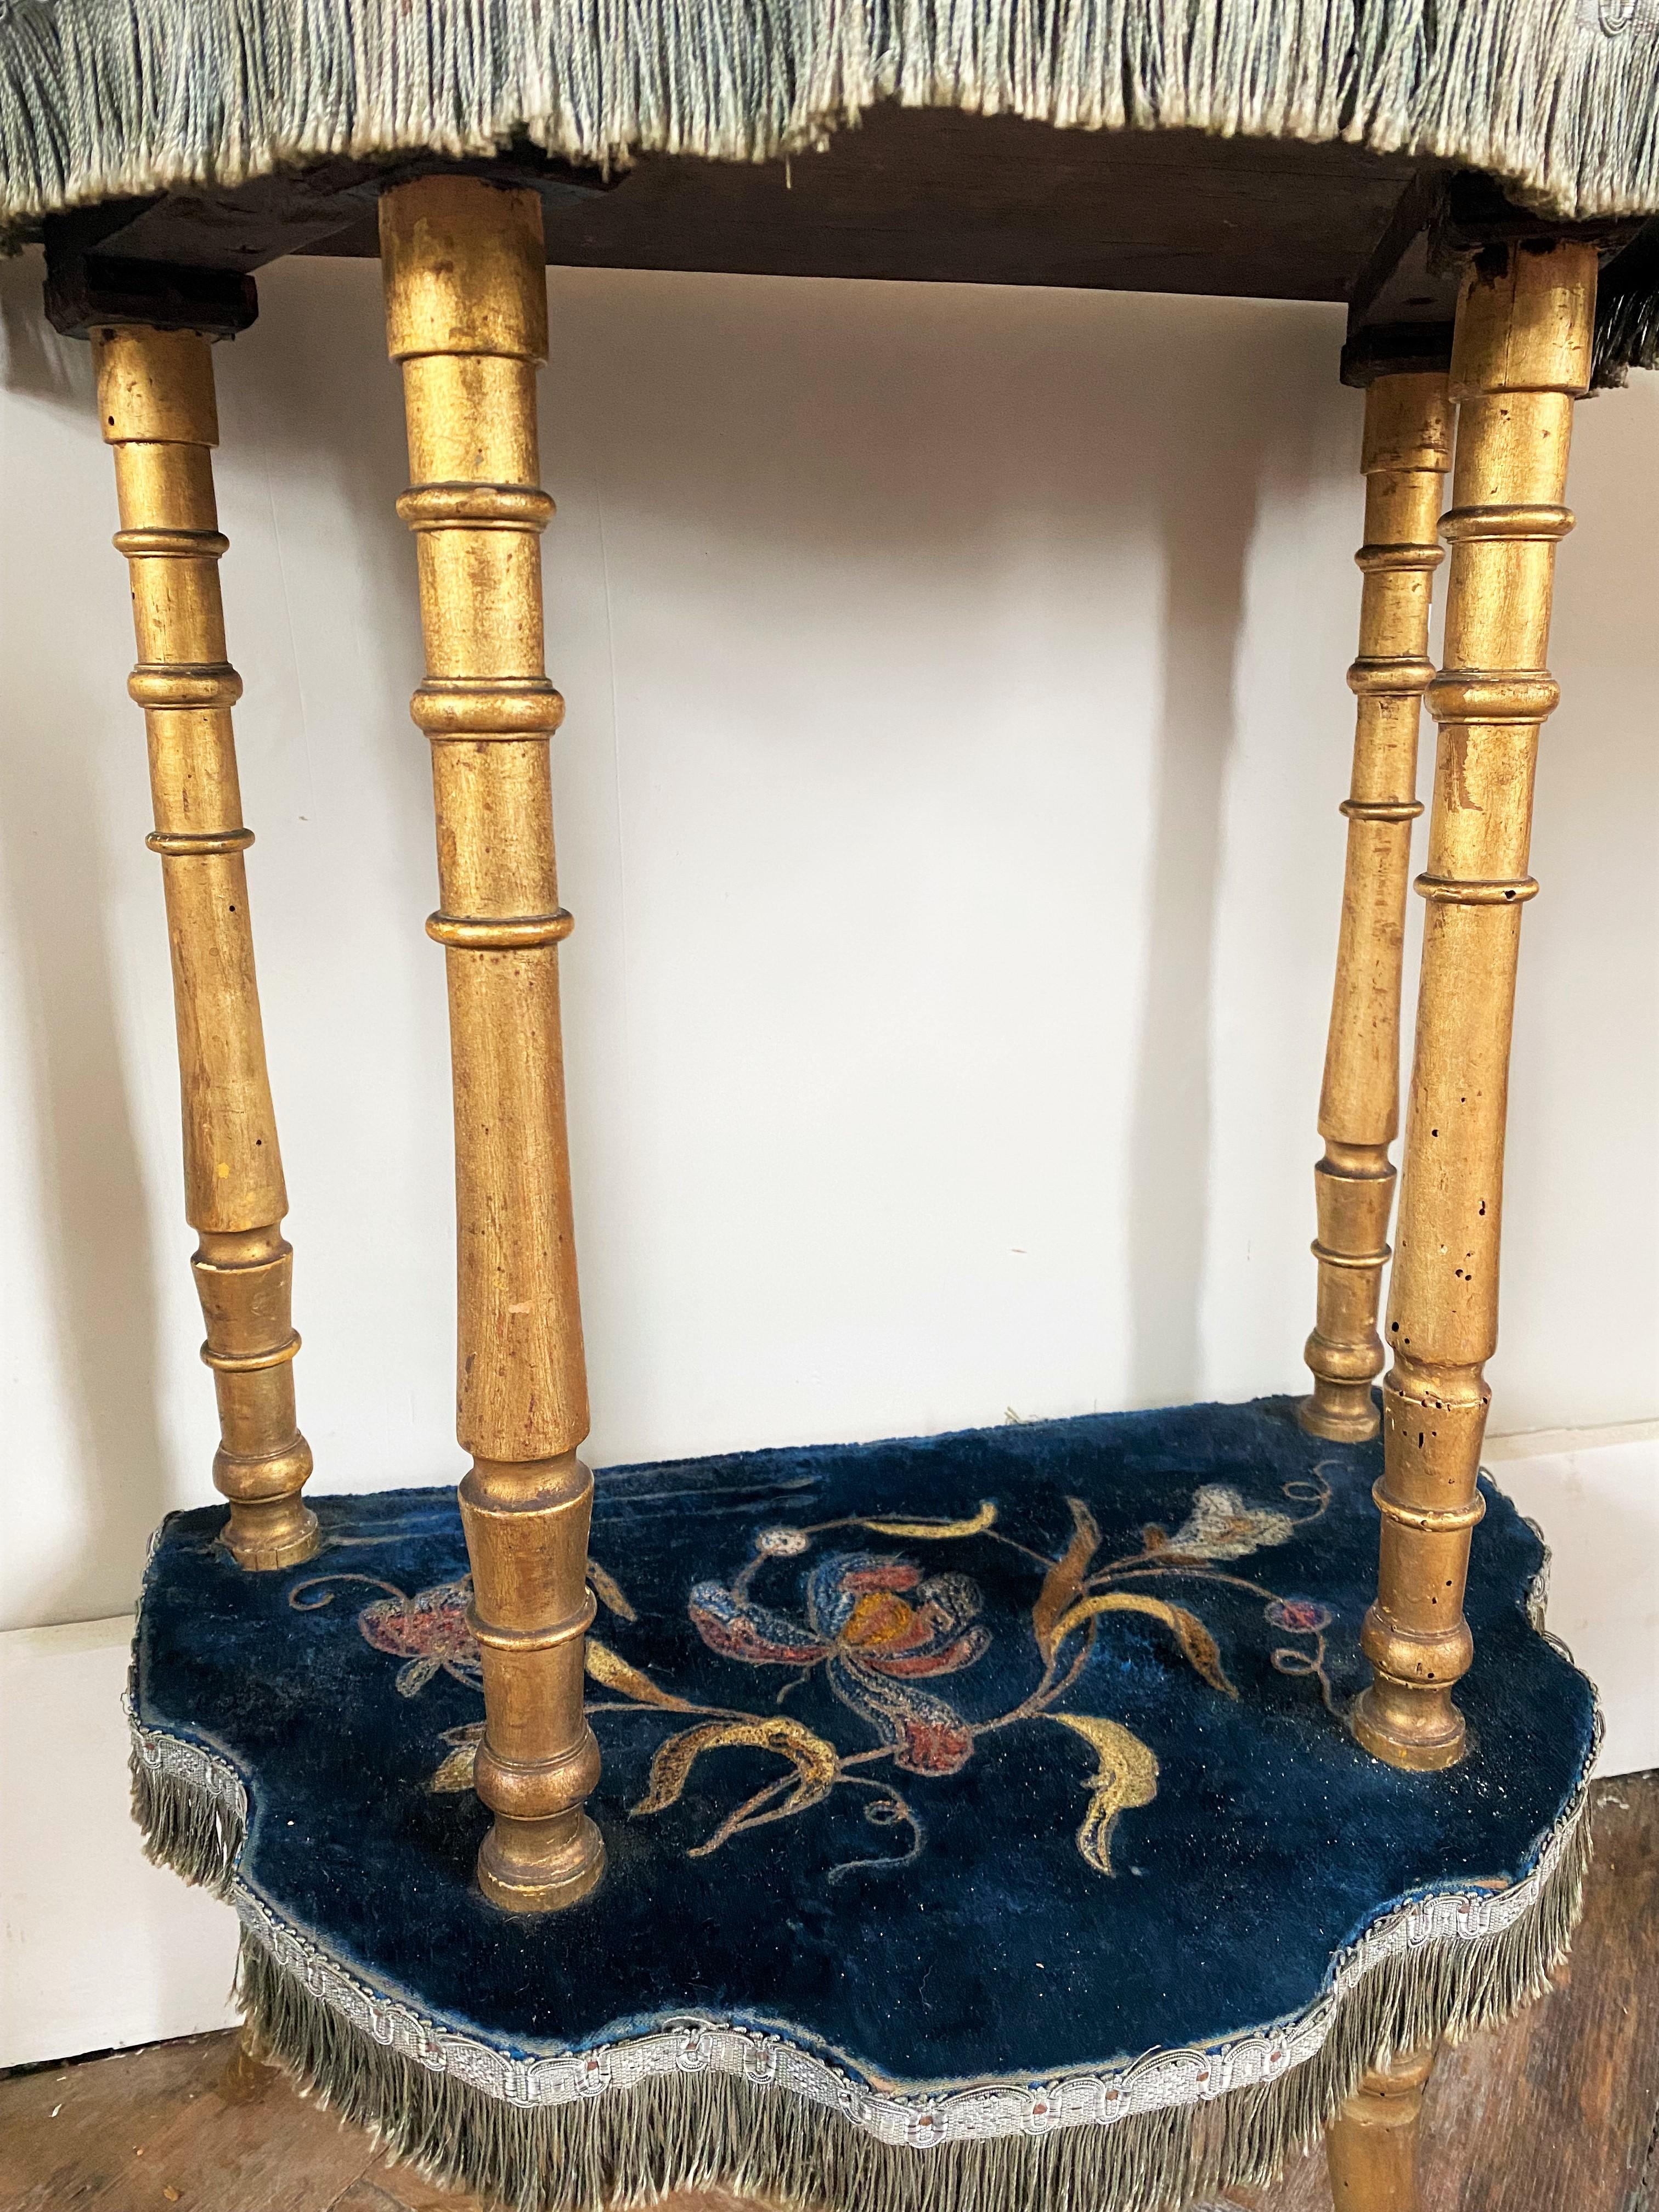 Demi-Lune Console Napoleon III Period Gilded Wood and Royal Bleu Velvet For Sale 1